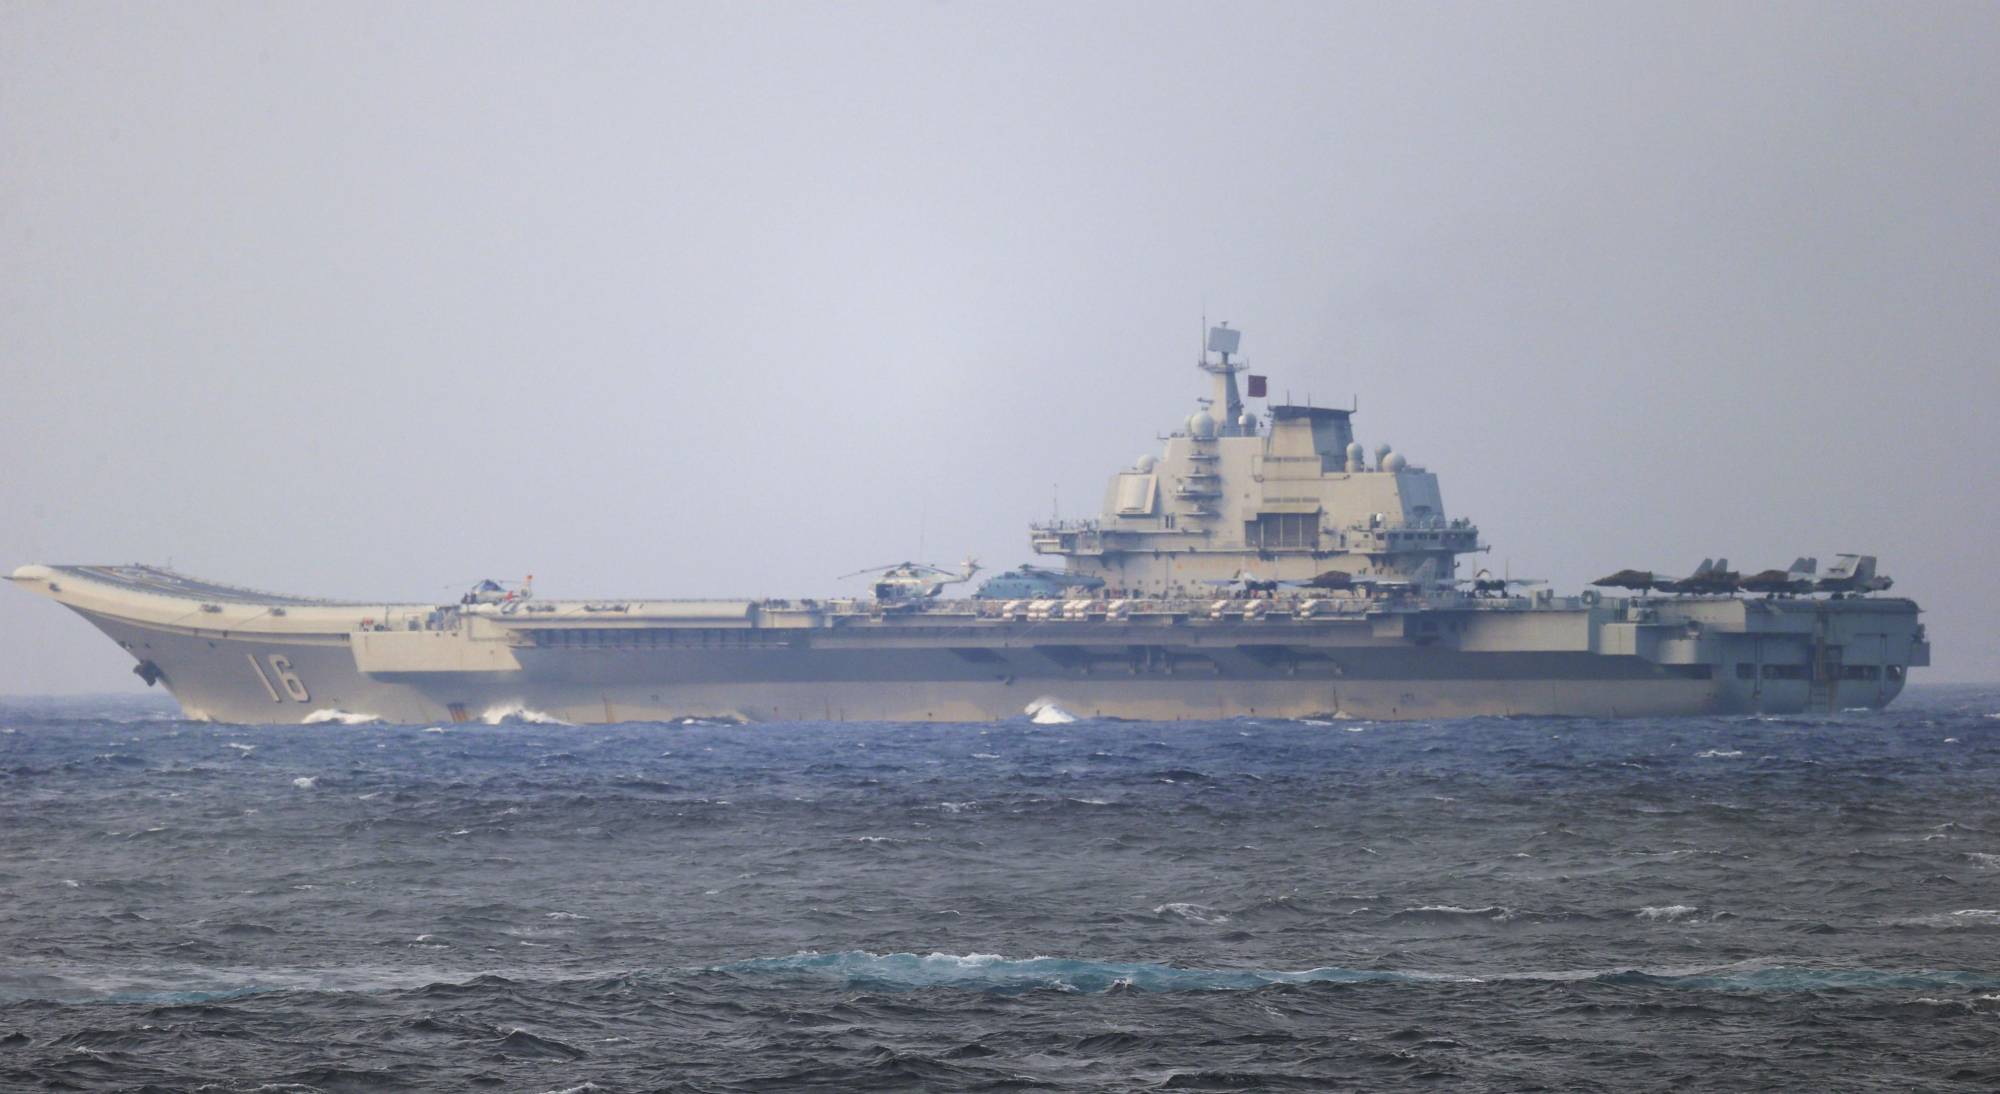 China's Liaoning aircraft carrier sails through the Miyako Strait near Okinawa over the weekend. | JAPAN DEFENSE MINISTRY / VIA KYODO